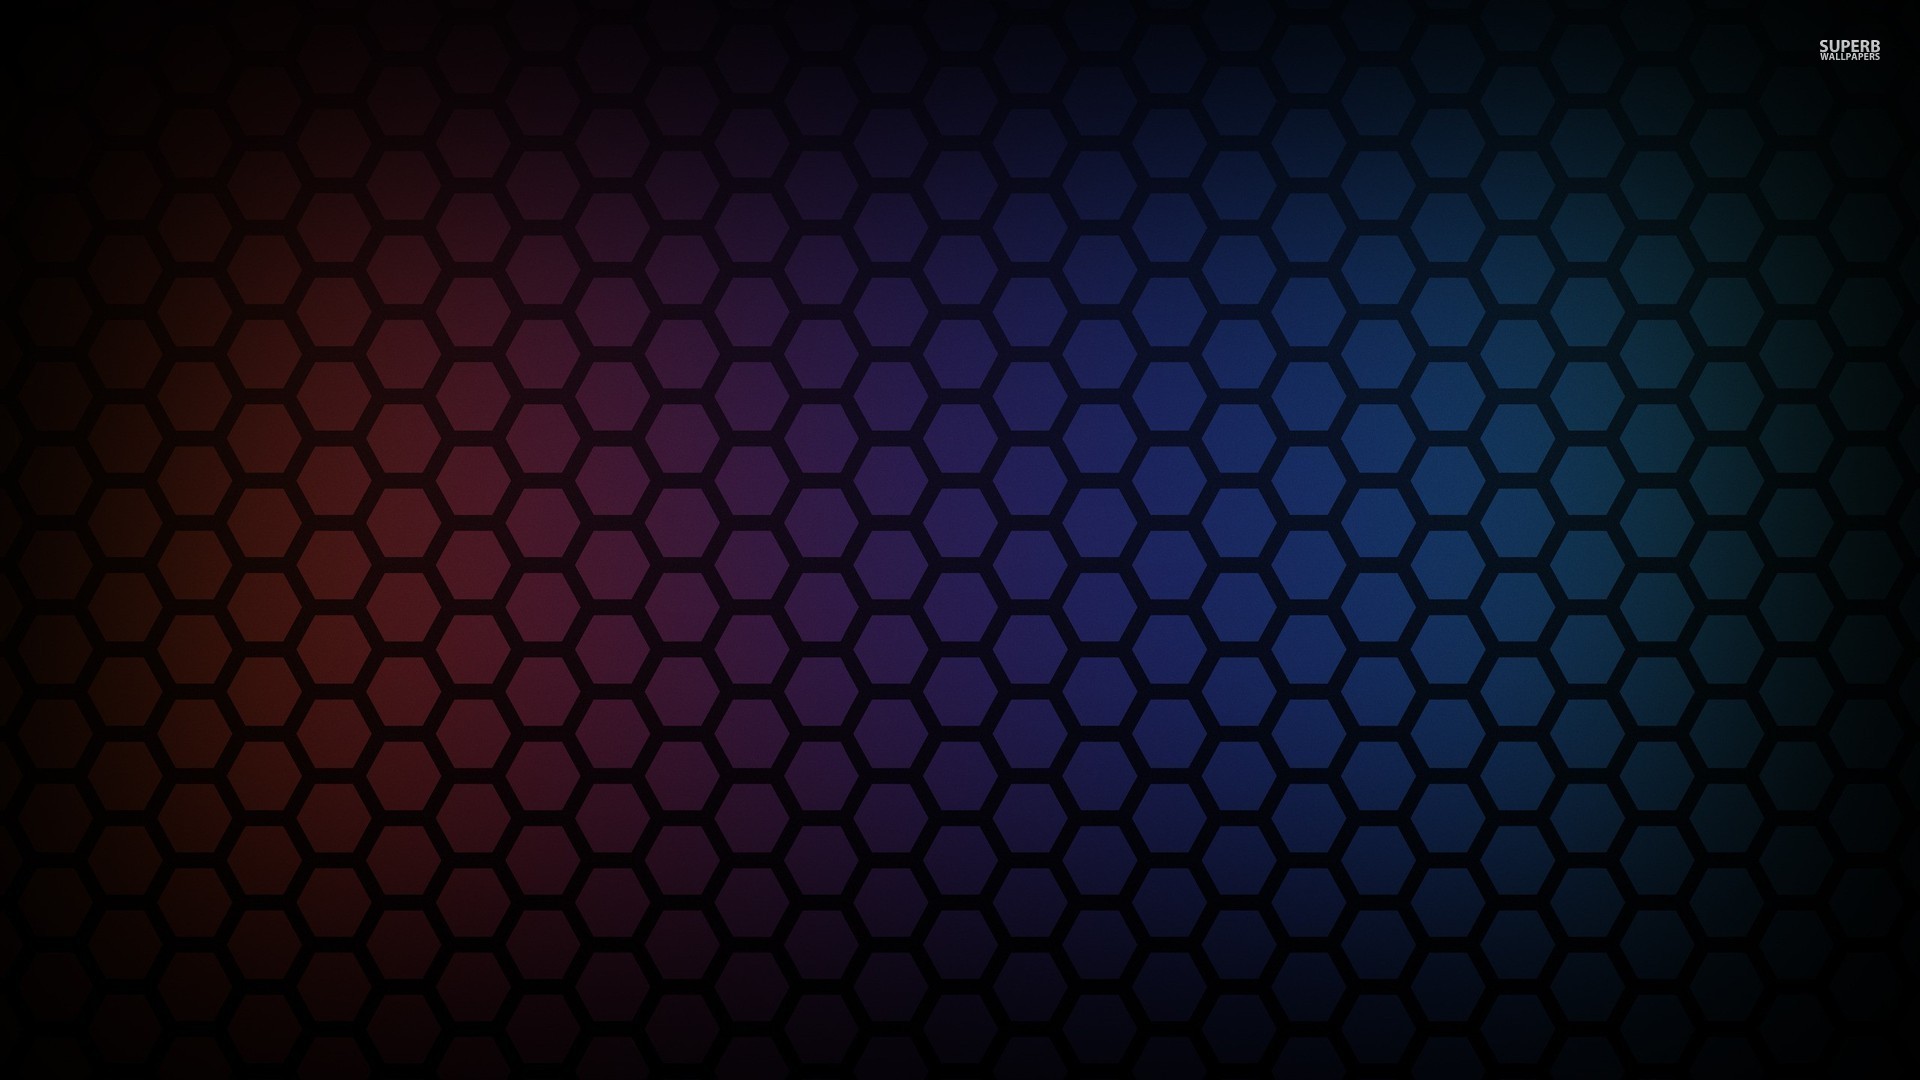 1920x1080 Honeycomb pattern wallpaper - Abstract wallpapers - #43270